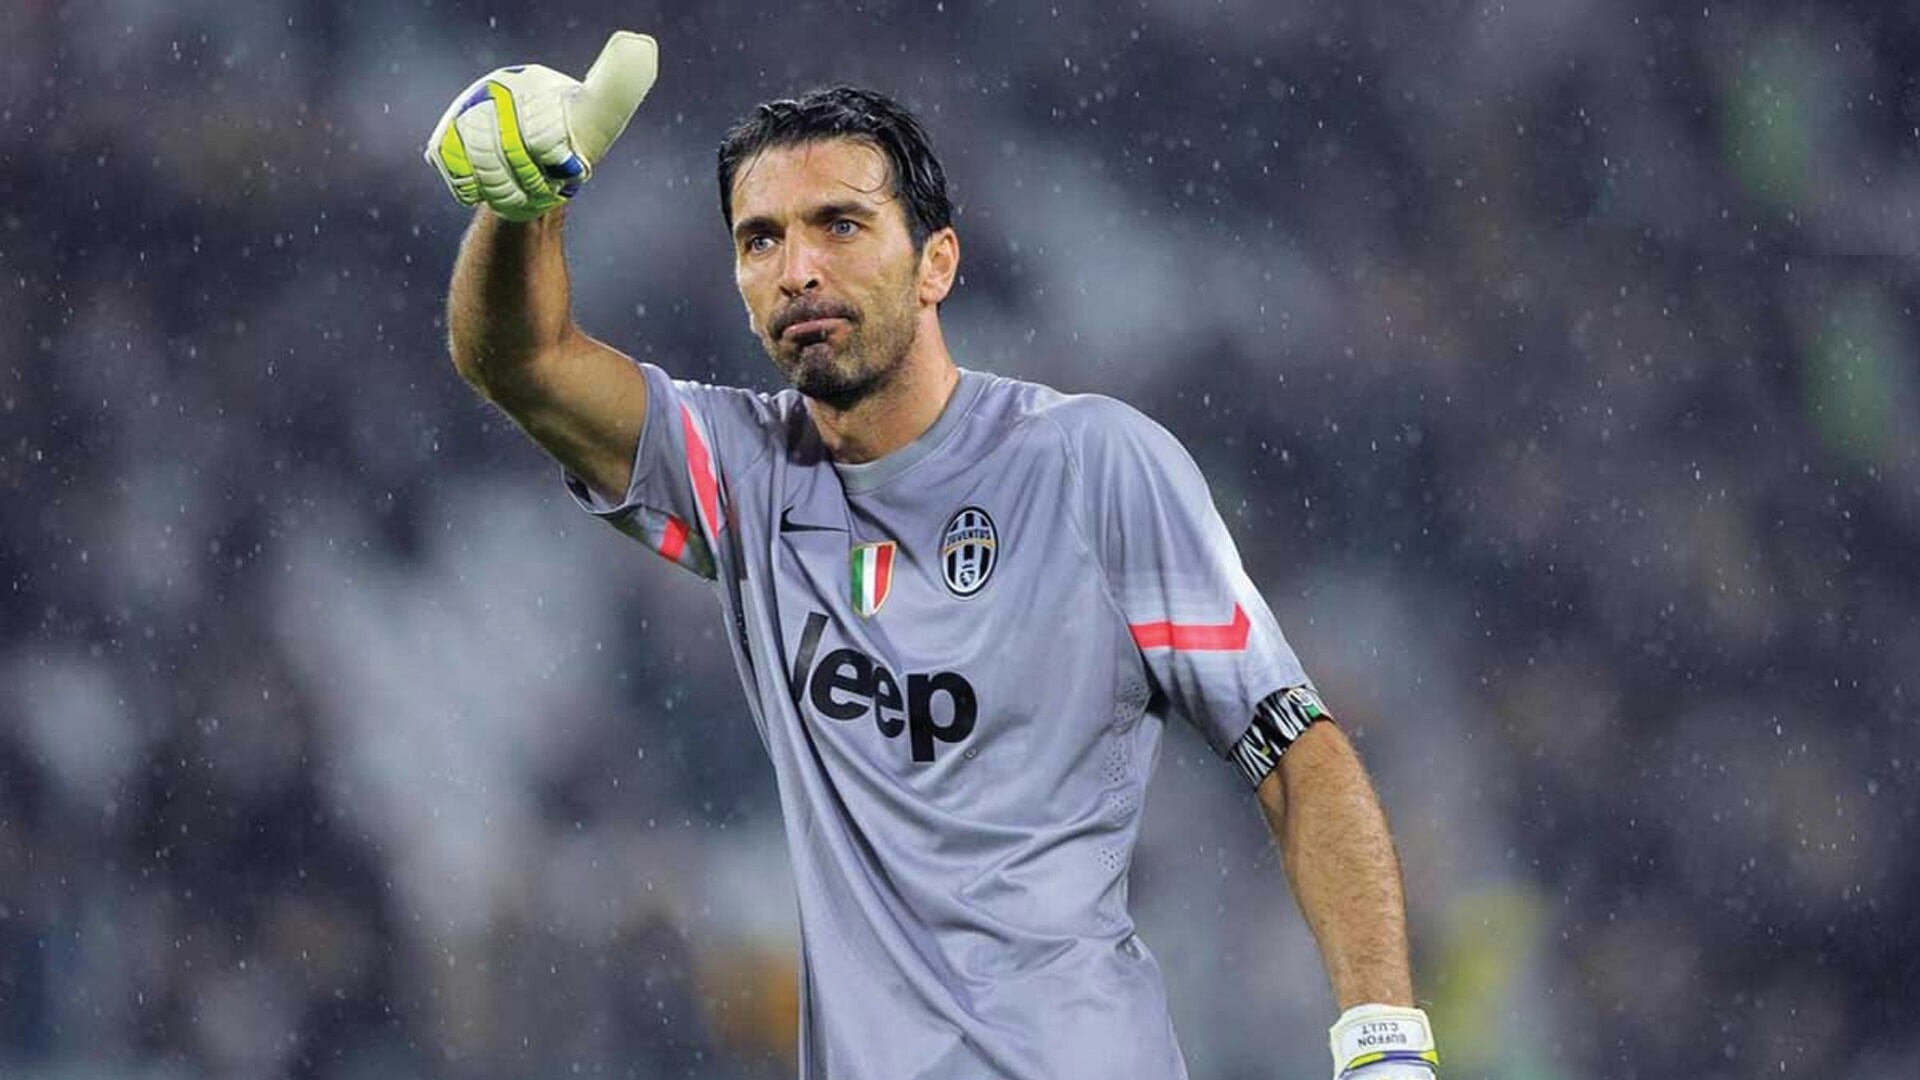 Gianluigi Buffon: The most capped player in the history of the Italy national team, The third-most capped European international player ever. 1920x1080 Full HD Wallpaper.